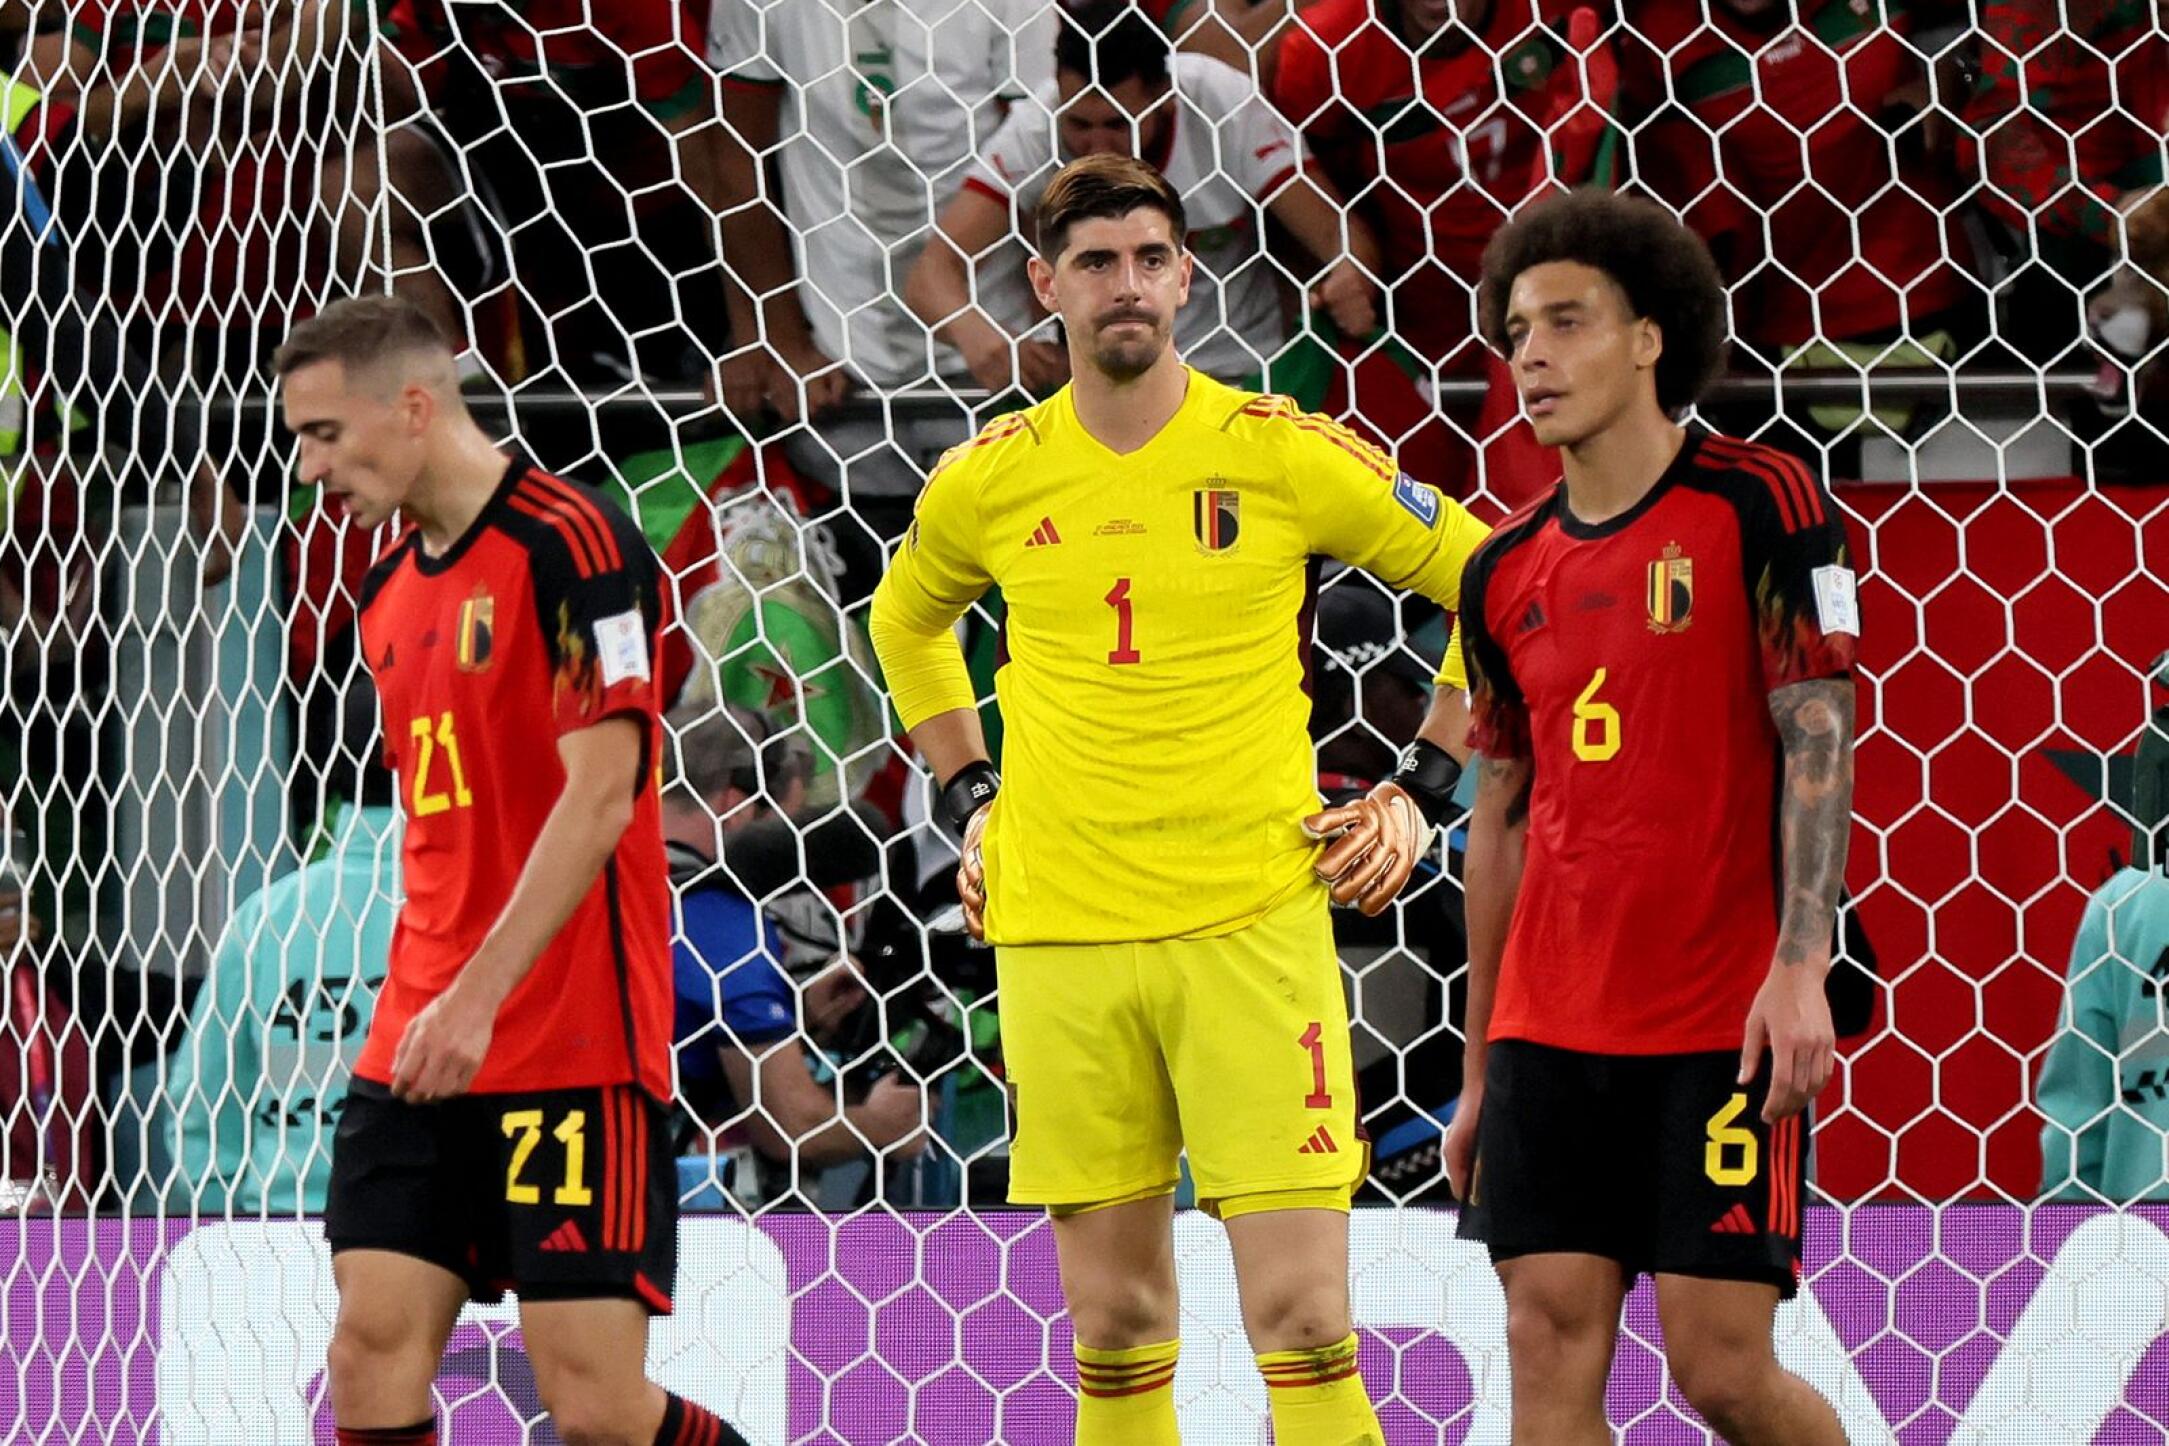 Belgium's Thibaut Courtois, Axel Witsel and Timothy Castagne react after conceding a goal during their Qatar 2022 World Cup Group F football match against Morocco at the Al-Thumama Stadium in Doha on Sunday